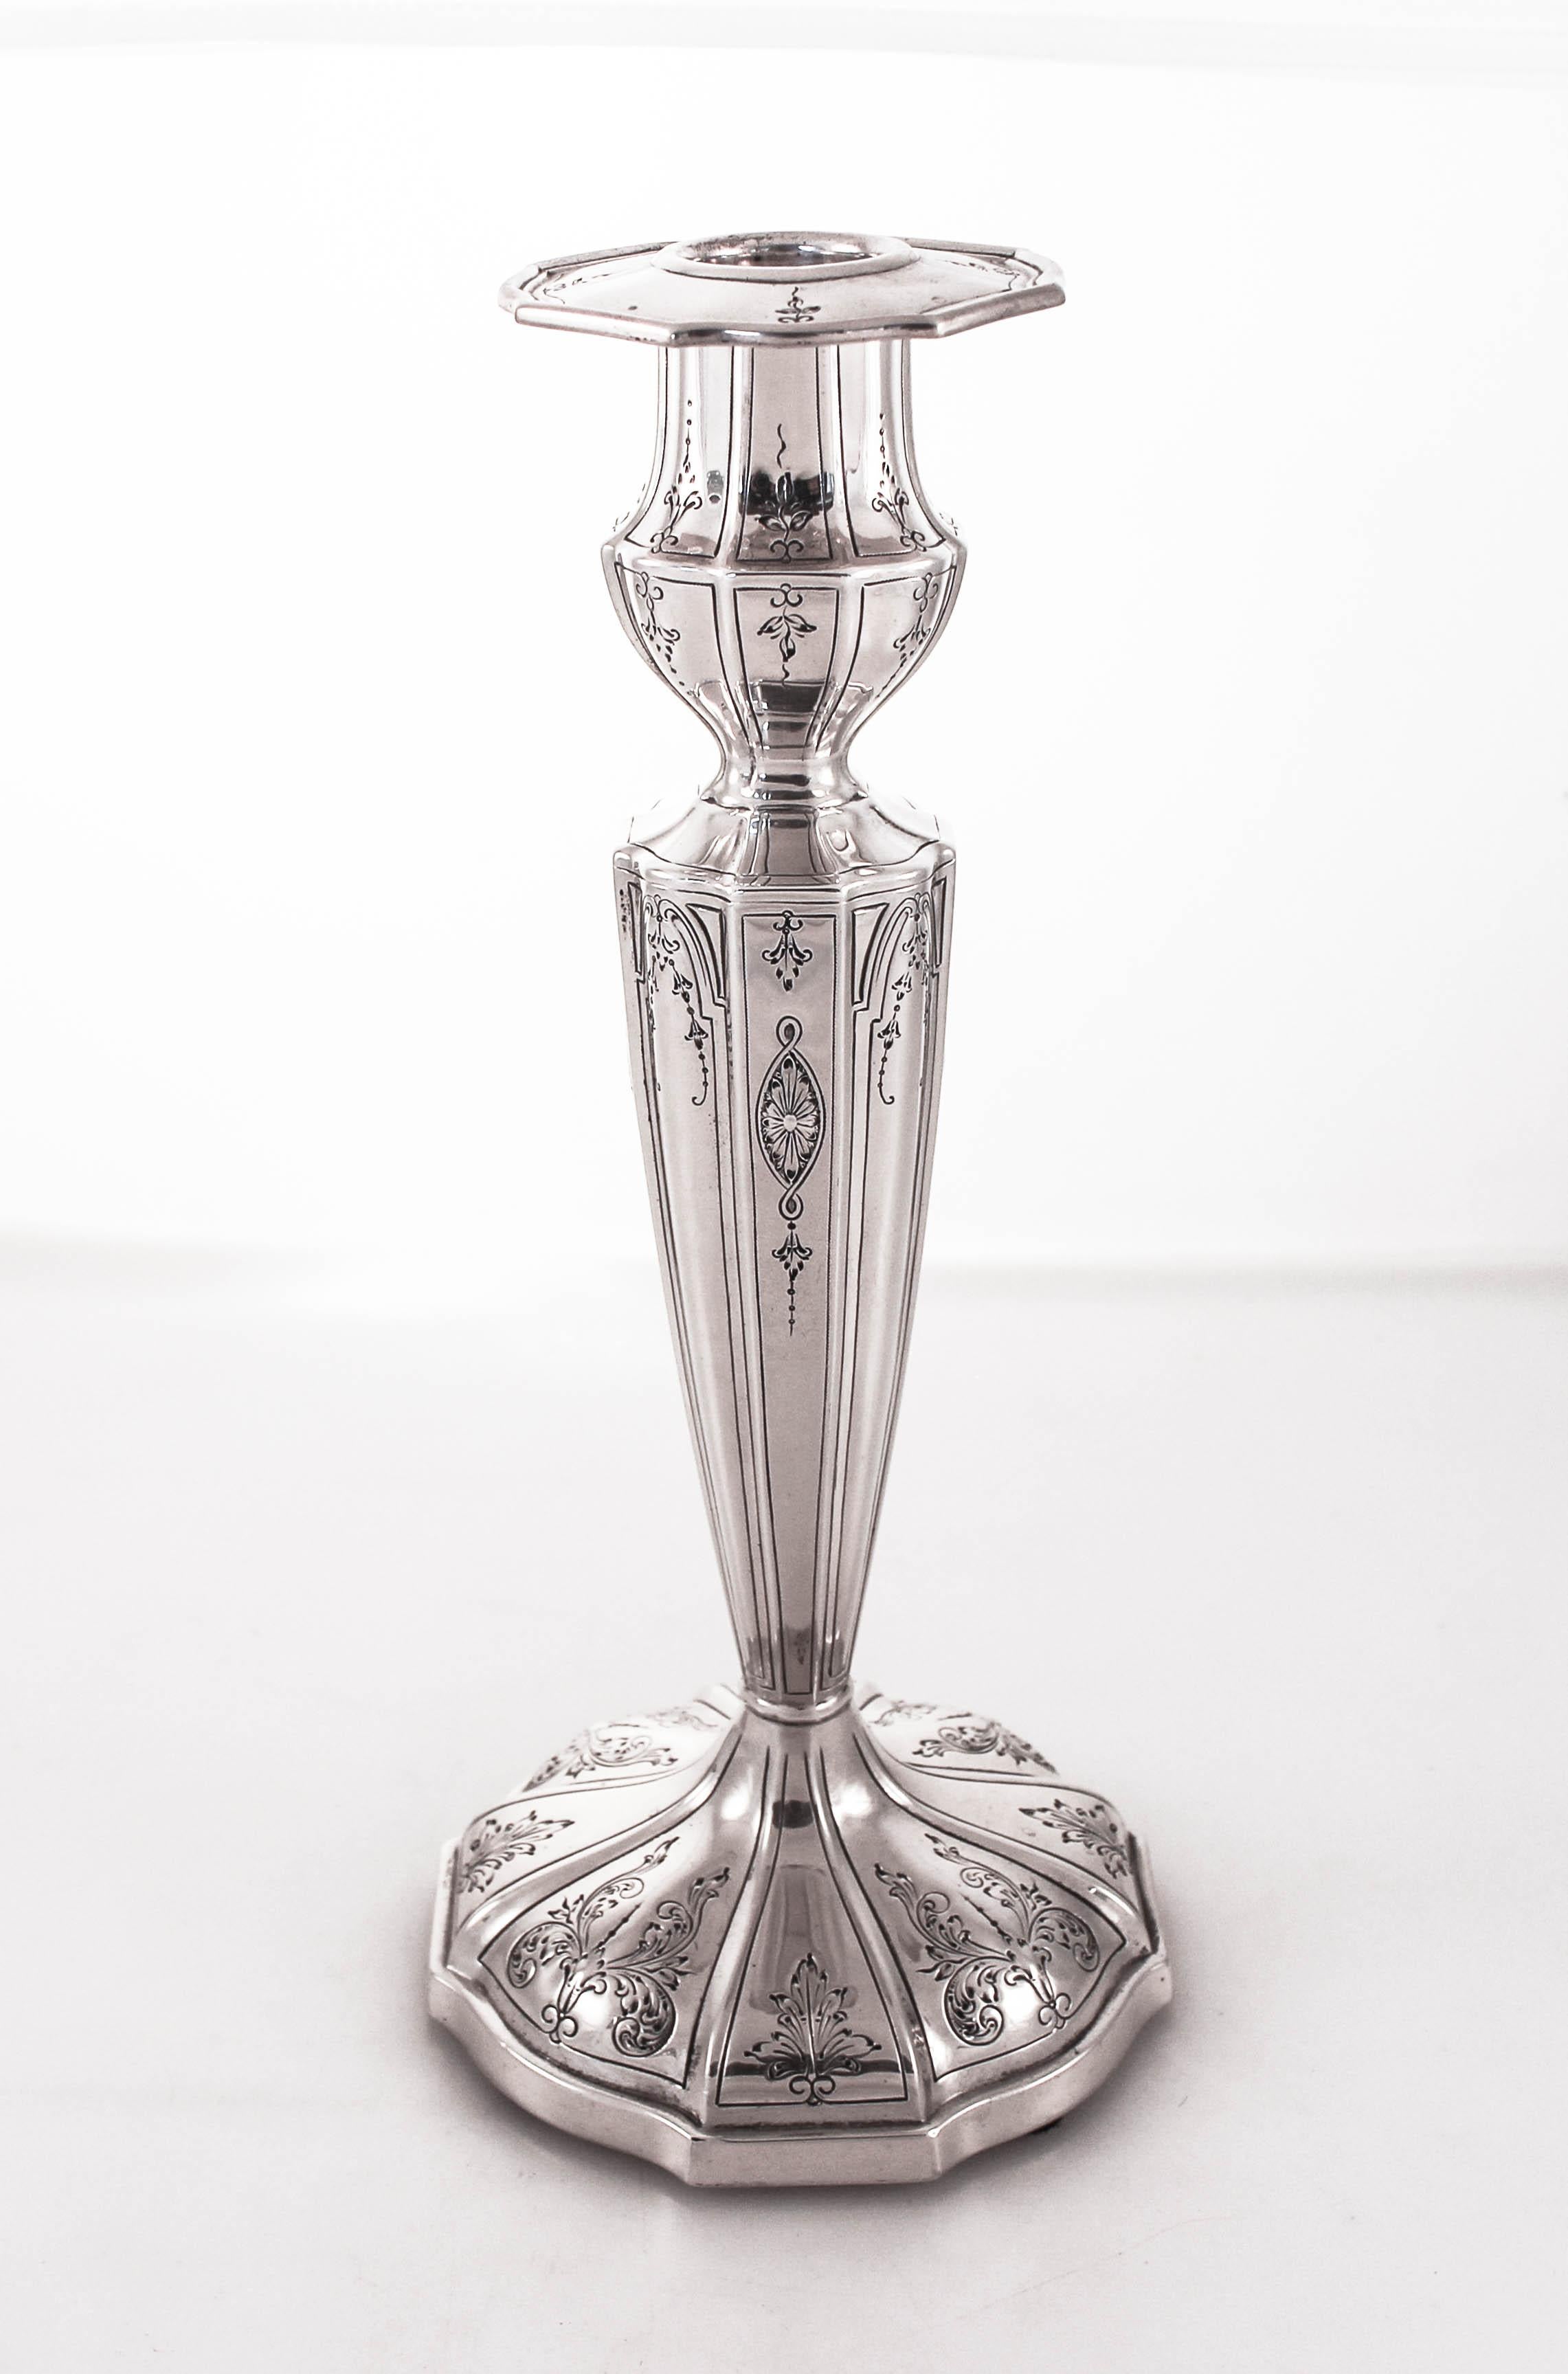 We are offering a pair of sterling silver candlesticks by William Durgin of Concord, NH. Works renowned for their upscale designs and patterns, the company was later acquired by the Gorham Silver Company. The base is scalloped as well as the body